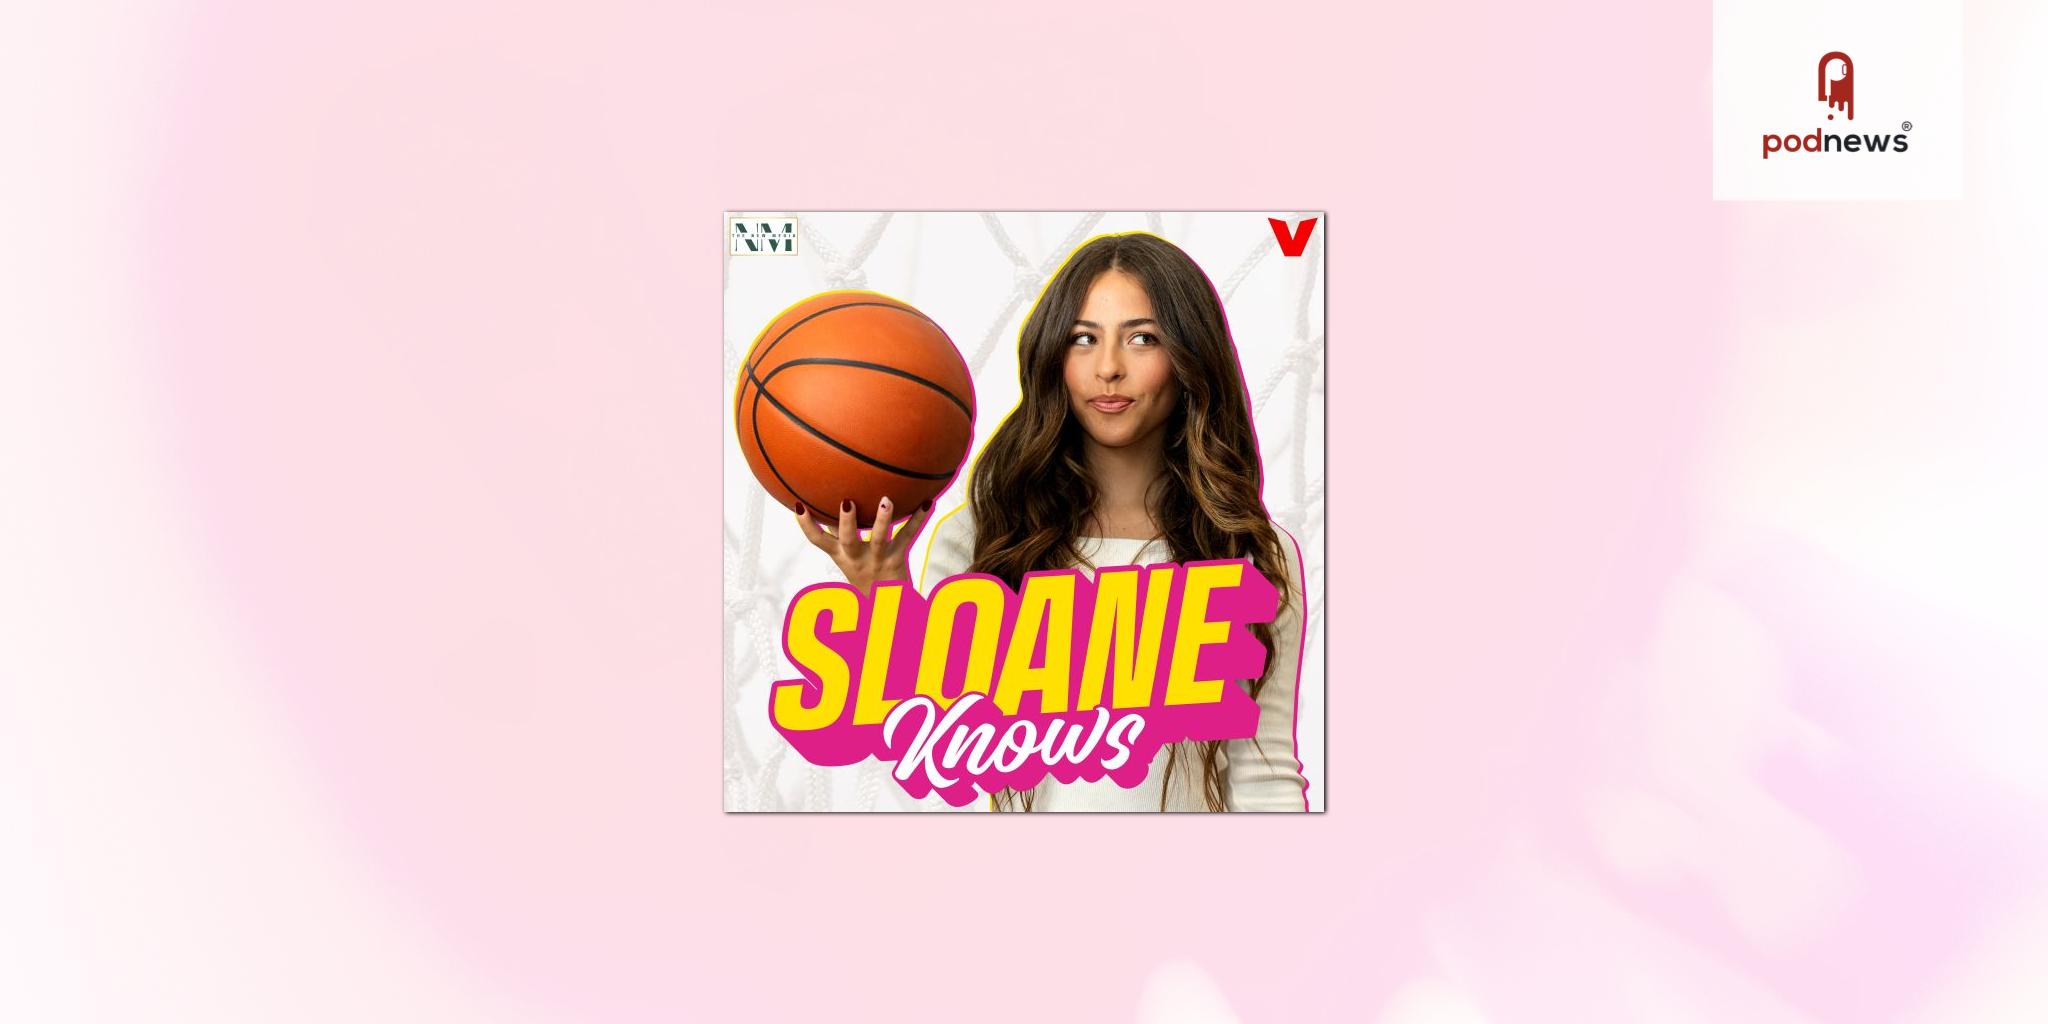 Jam Street Media Launches “Sloane Knows,” A New NBA Show With A Gen Z Twist